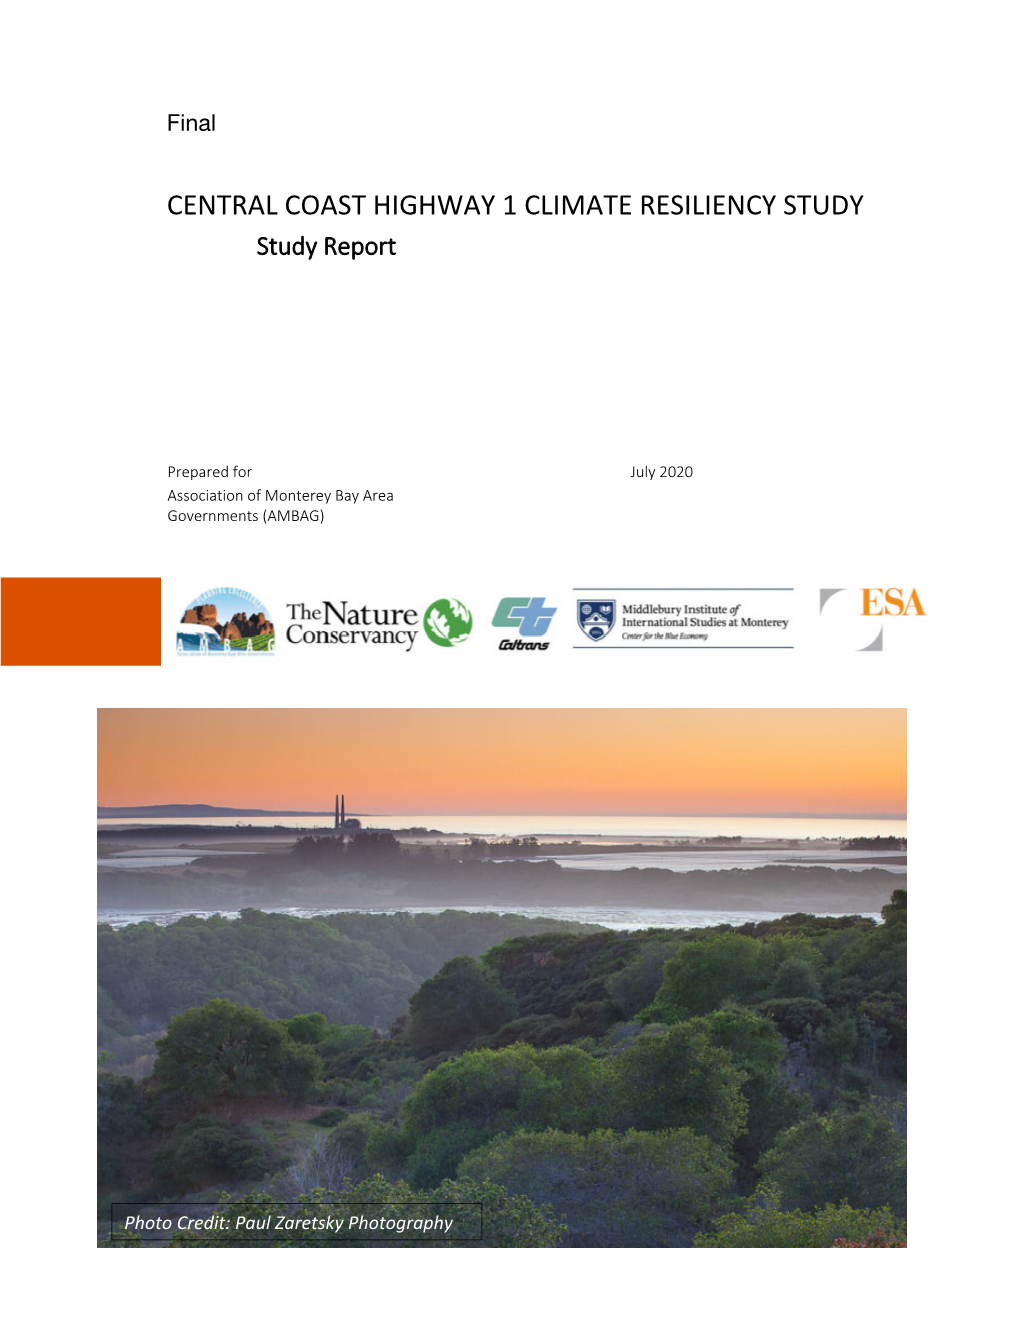 CENTRAL COAST HIGHWAY 1 CLIMATE RESILIENCY STUDY Study Report